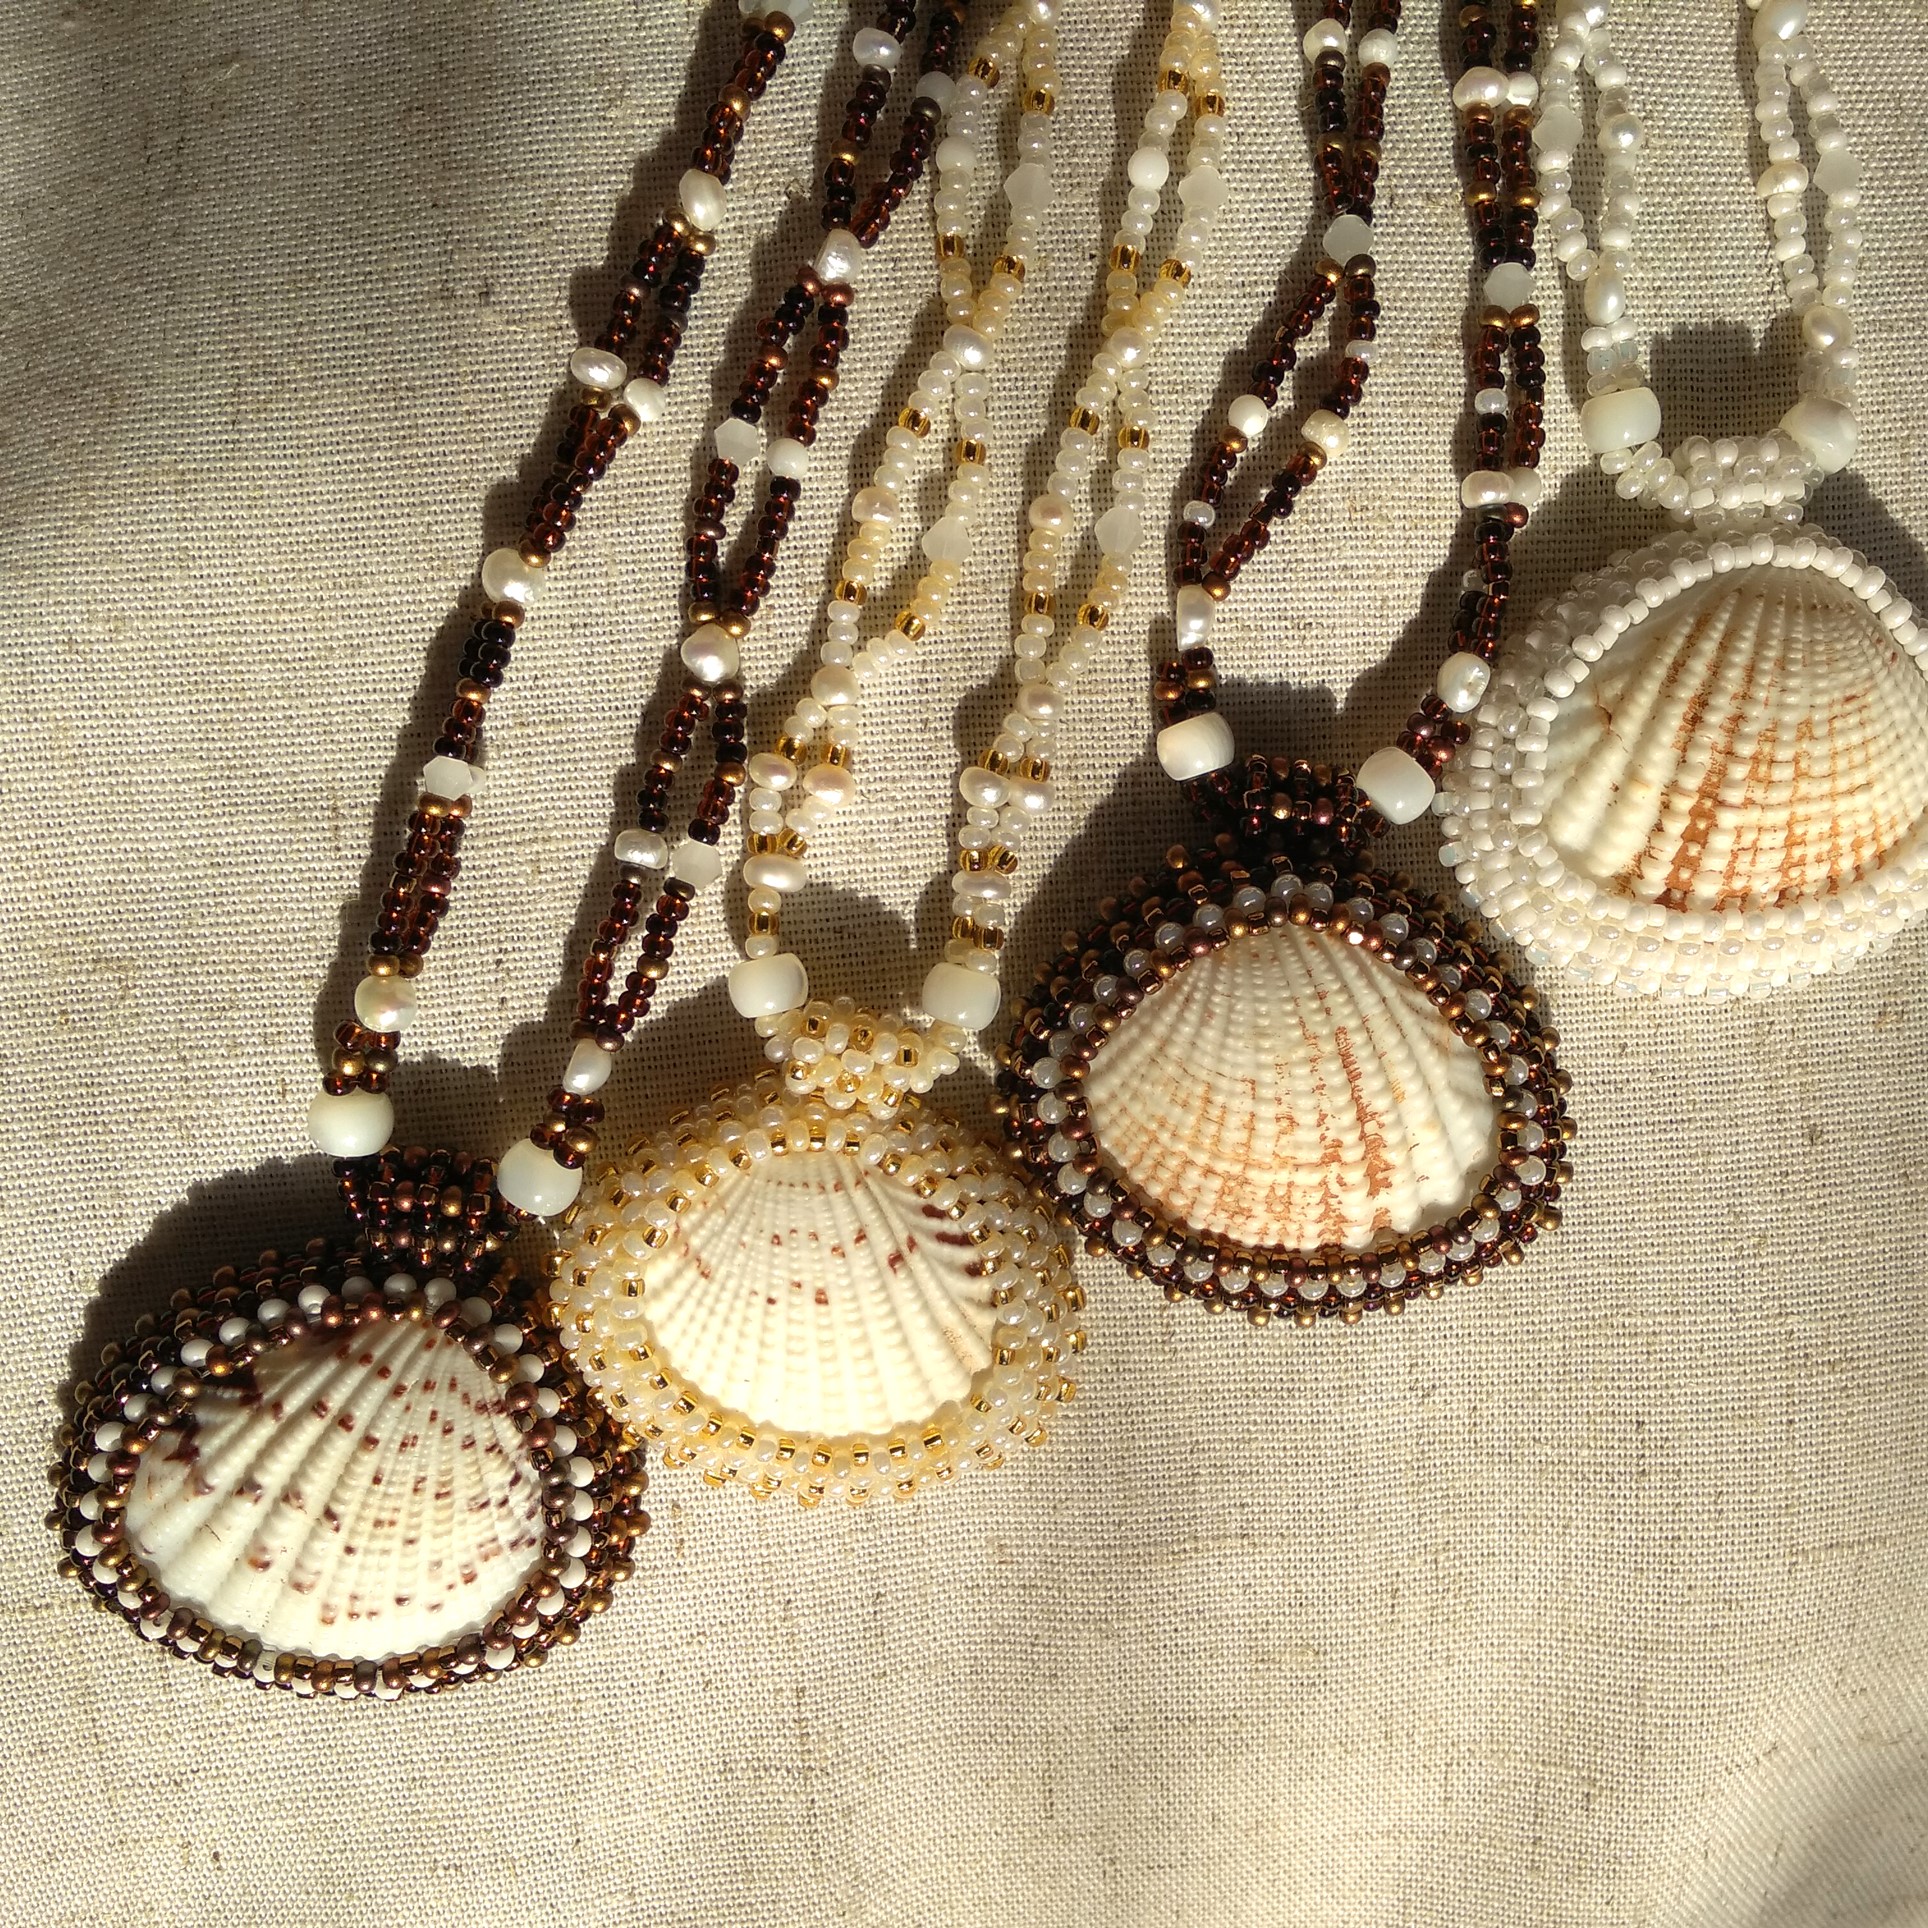 I’m A Handmader And I Love Beading! I Make Brooches, Earrings, Necklaces, I Wear It And I Tell About Technics.